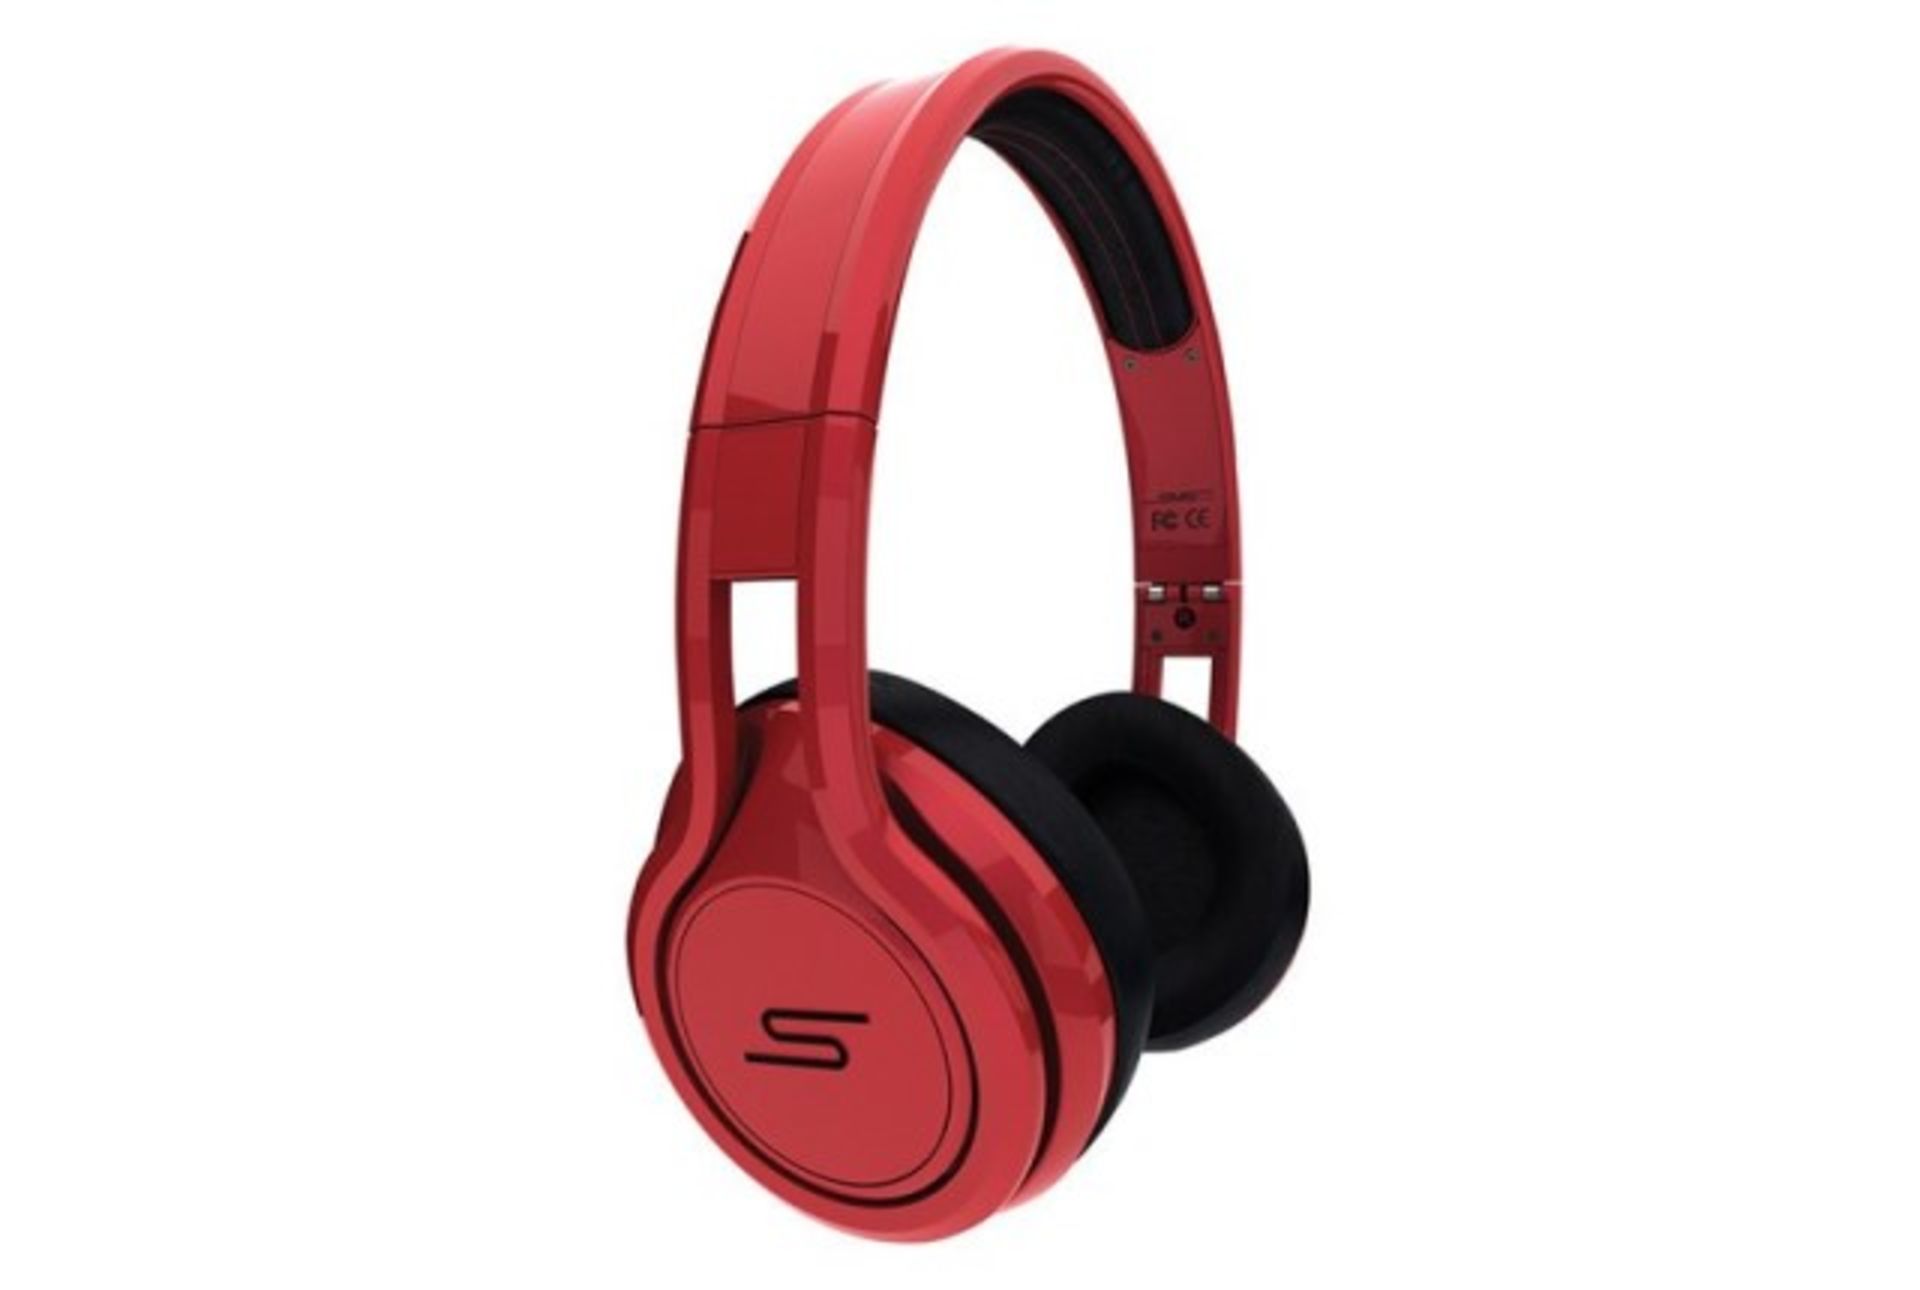 V Brand New SMS Audio Street By 50 Cent On-Ear Headphones With Mic - Red *Item will be available for